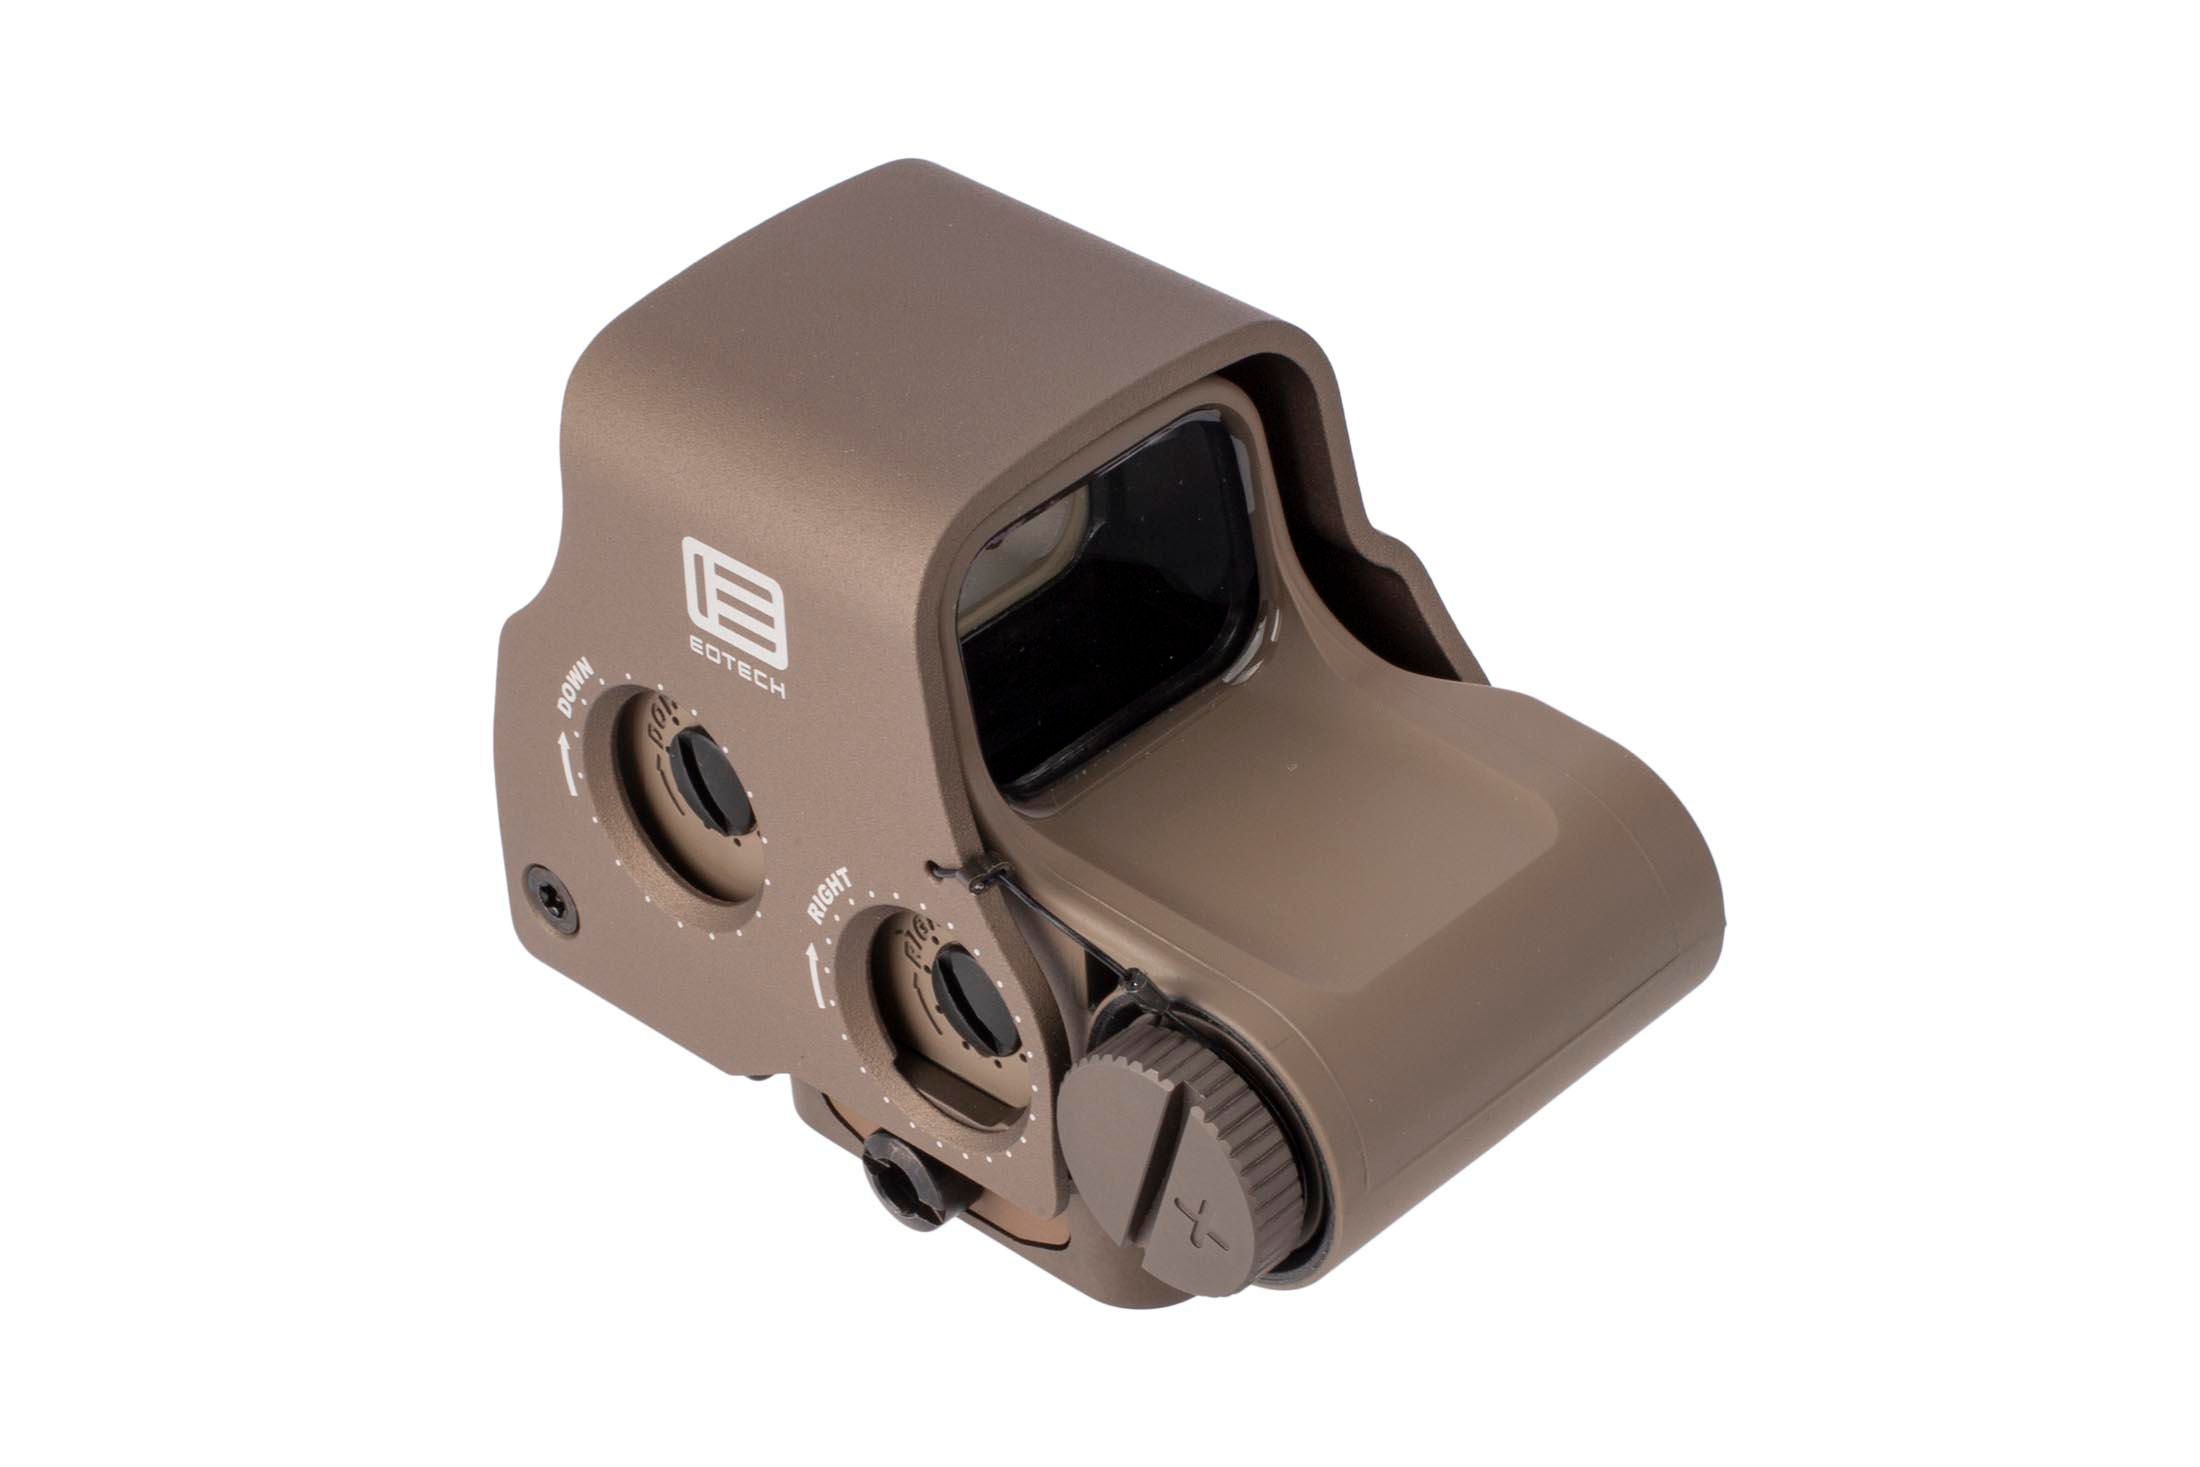 EOTECH EXPS3-2 Holographic Weapon Sight - Tan